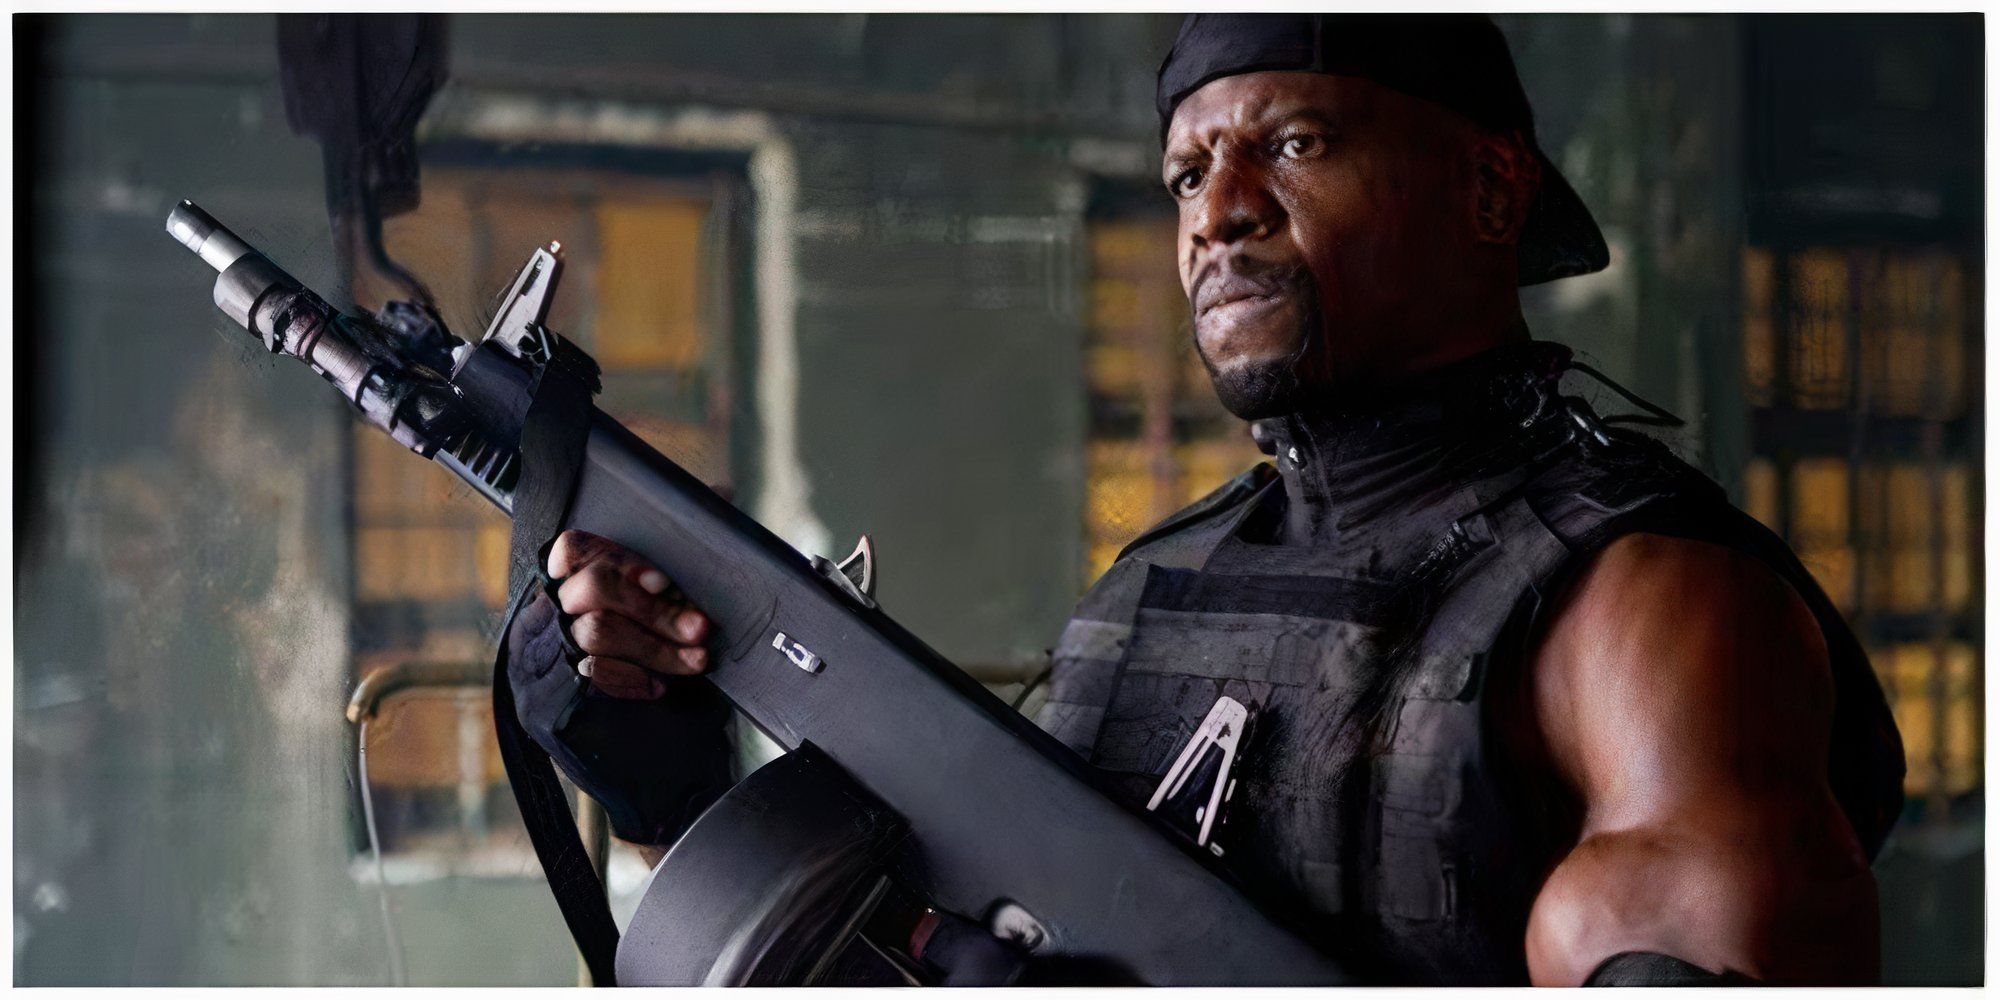 Terry Crews Expendables